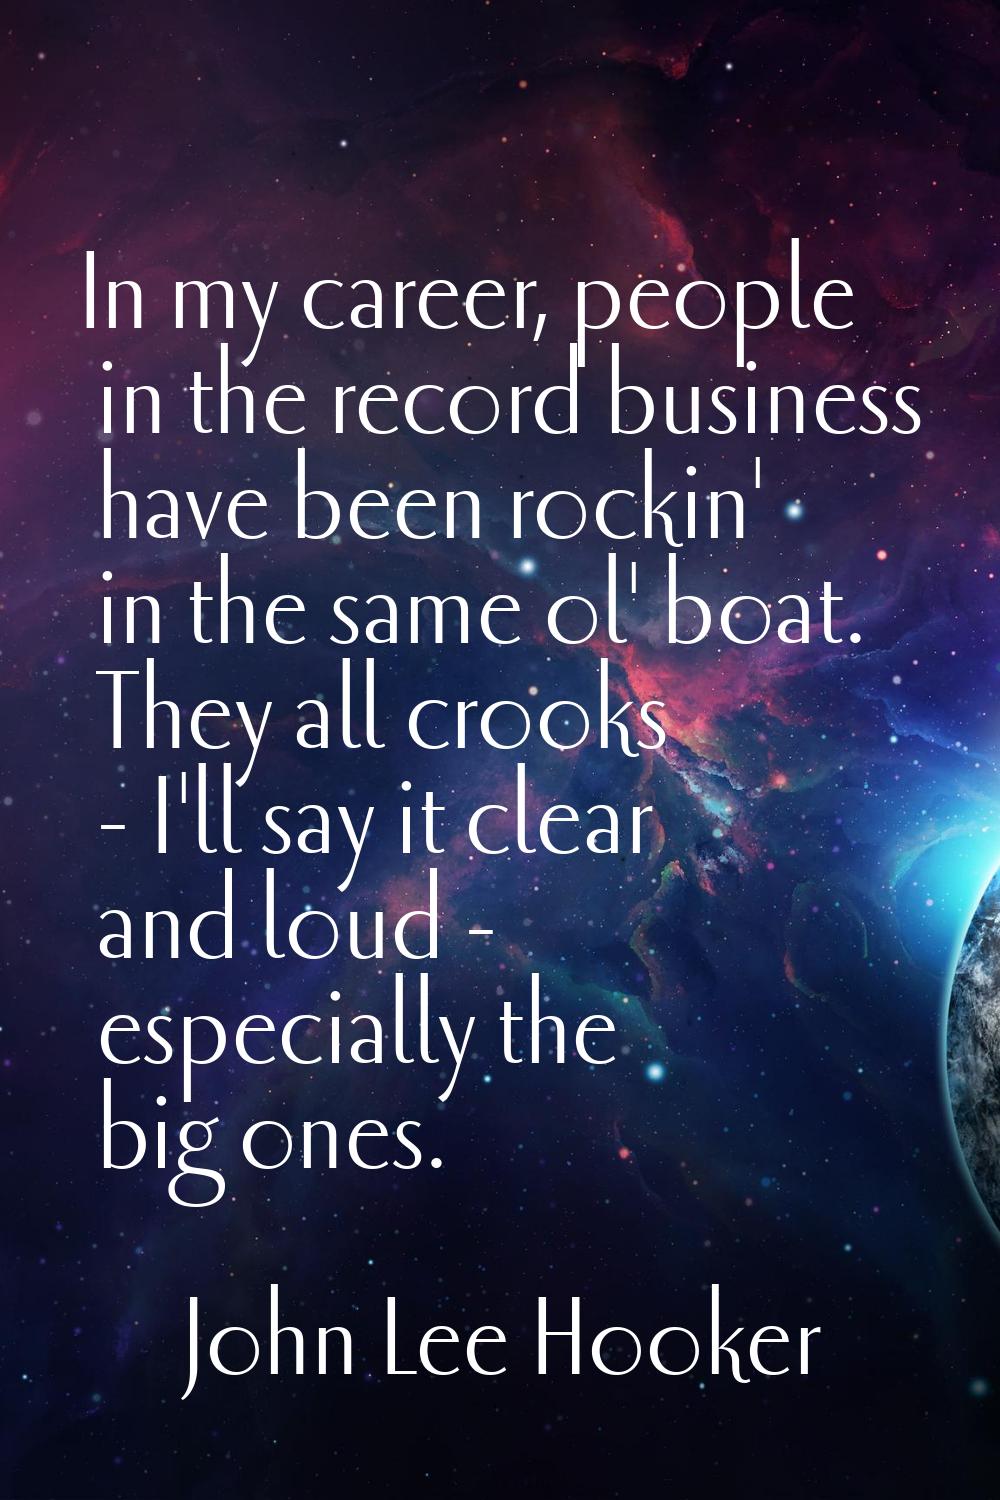 In my career, people in the record business have been rockin' in the same ol' boat. They all crooks